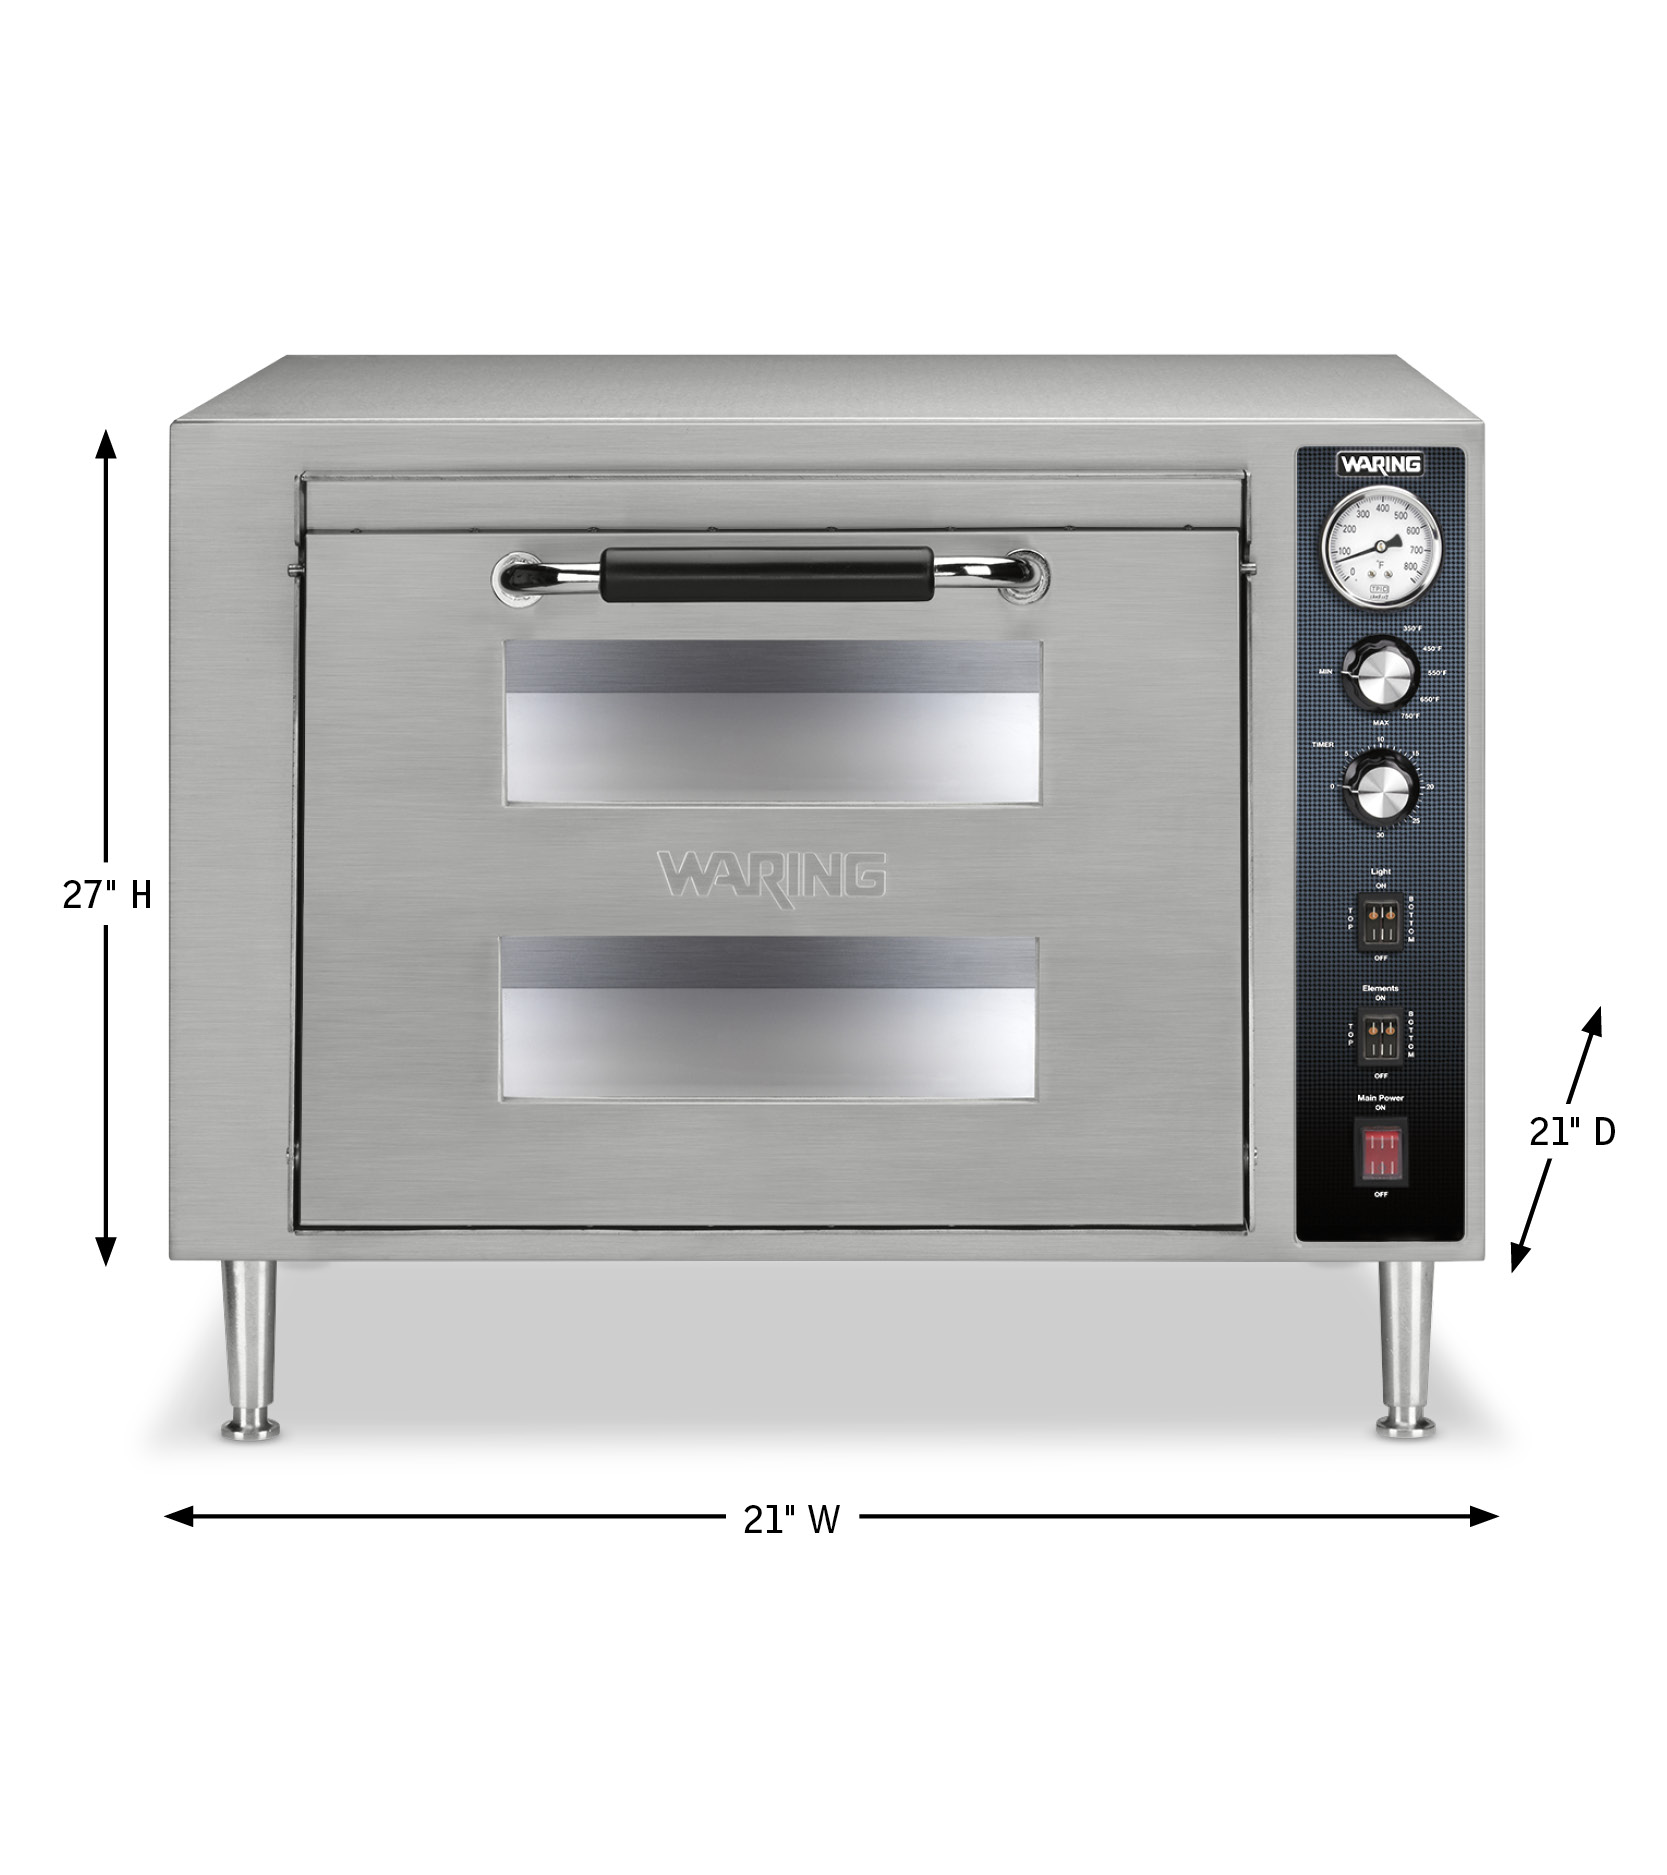 https://www.waringcommercialproducts.com/files/products/wpo700-waring-pizza-oven-spec.jpg